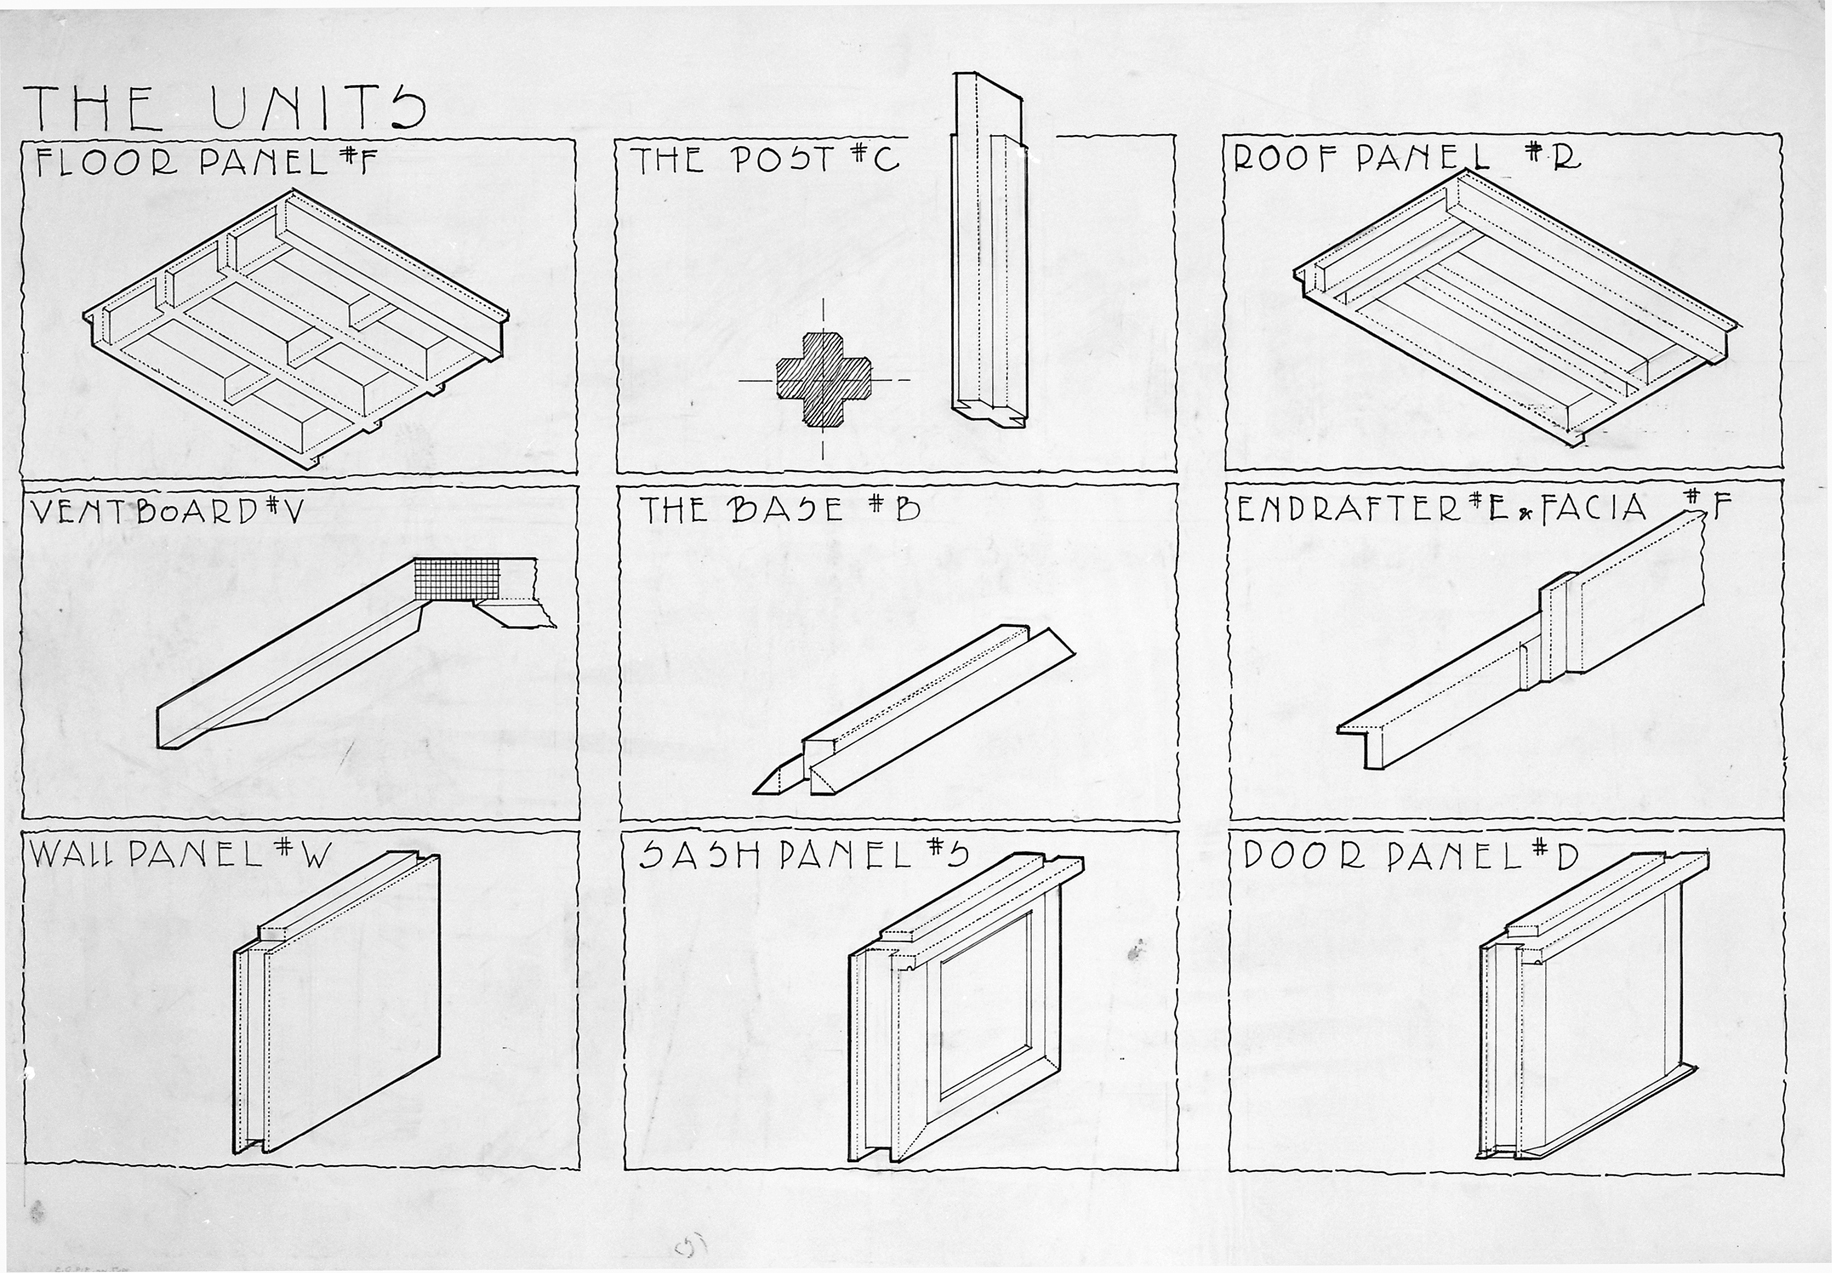 Rudolph Schindler’s drawing of the elements in the panel-post construction system.